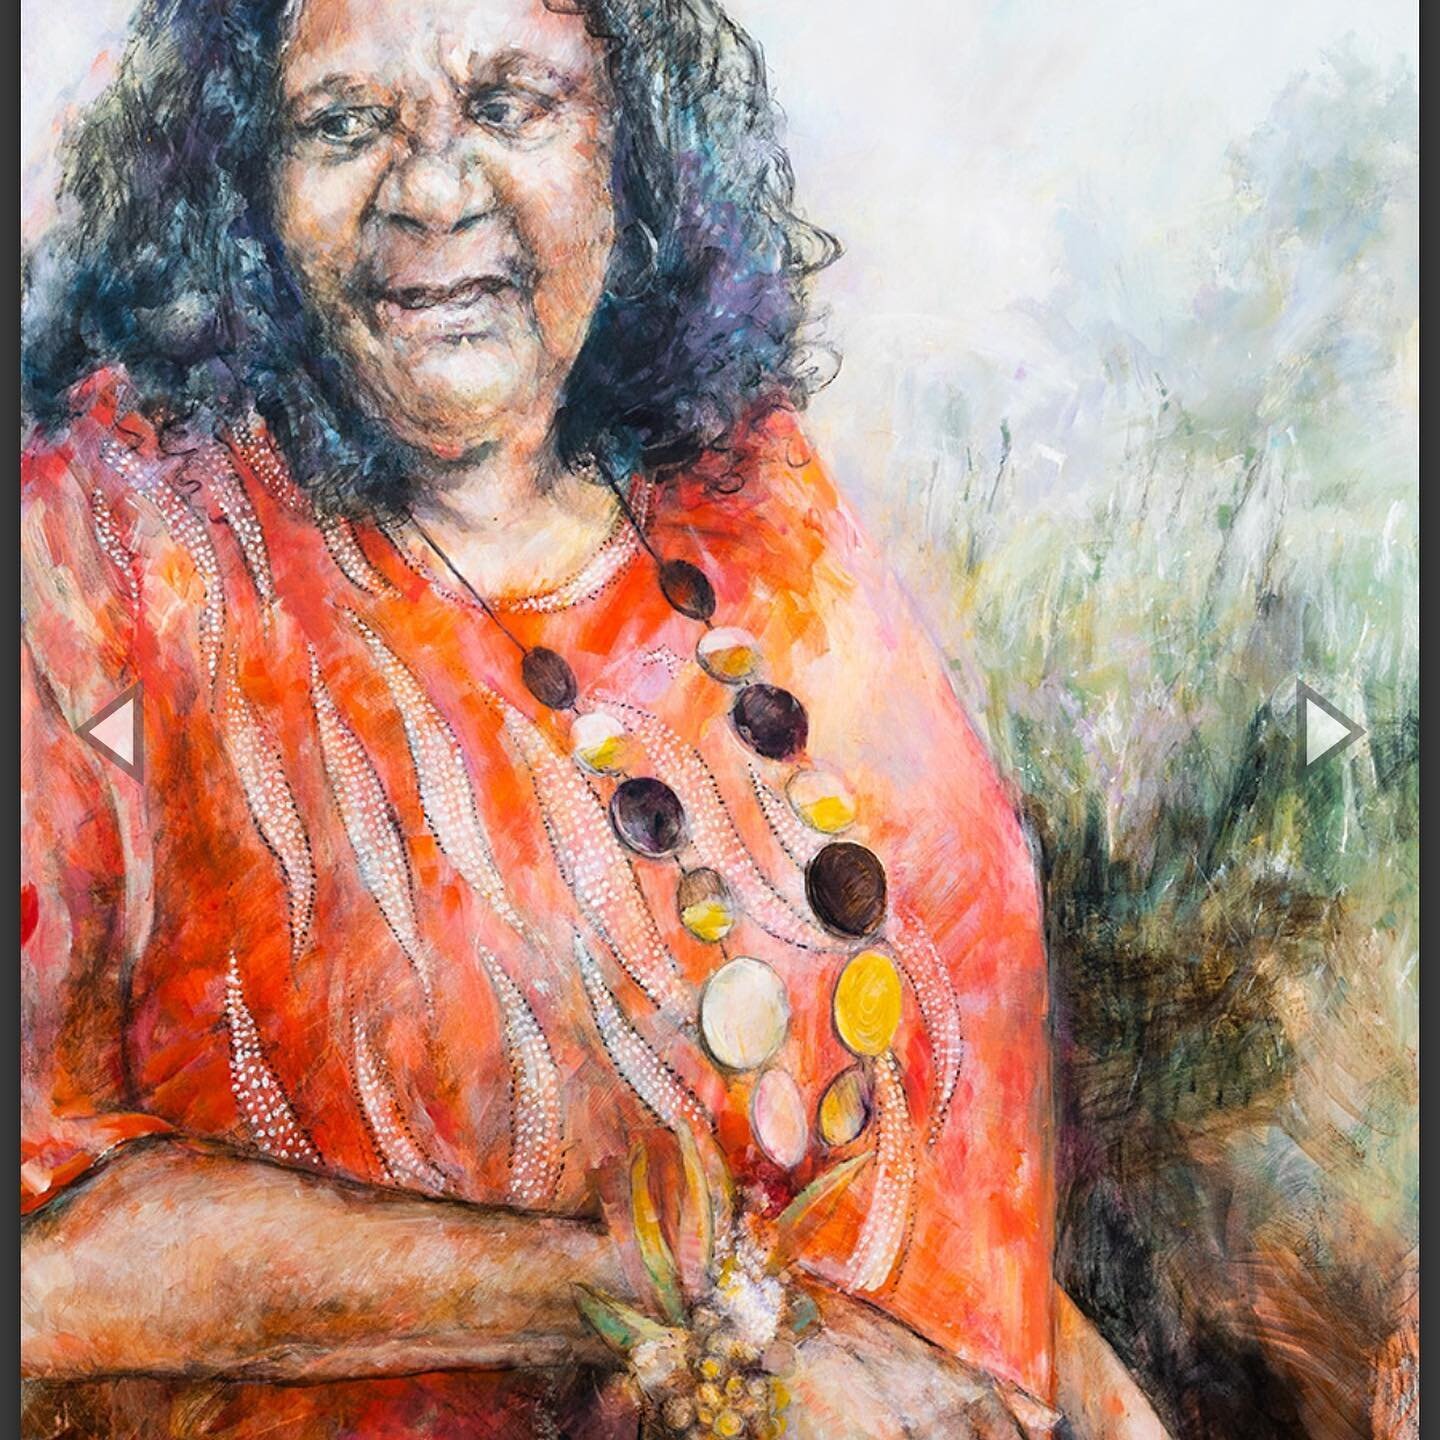 In beautiful synchronicity with today's OPEN DAR video, the 2020 Blacktown City Art Prizes were announced on Sat 28 Nov, and Graham Cheney won the Local Artist Prize for his portrait 'Auntie Rita Wright' 
@BlacktownArts